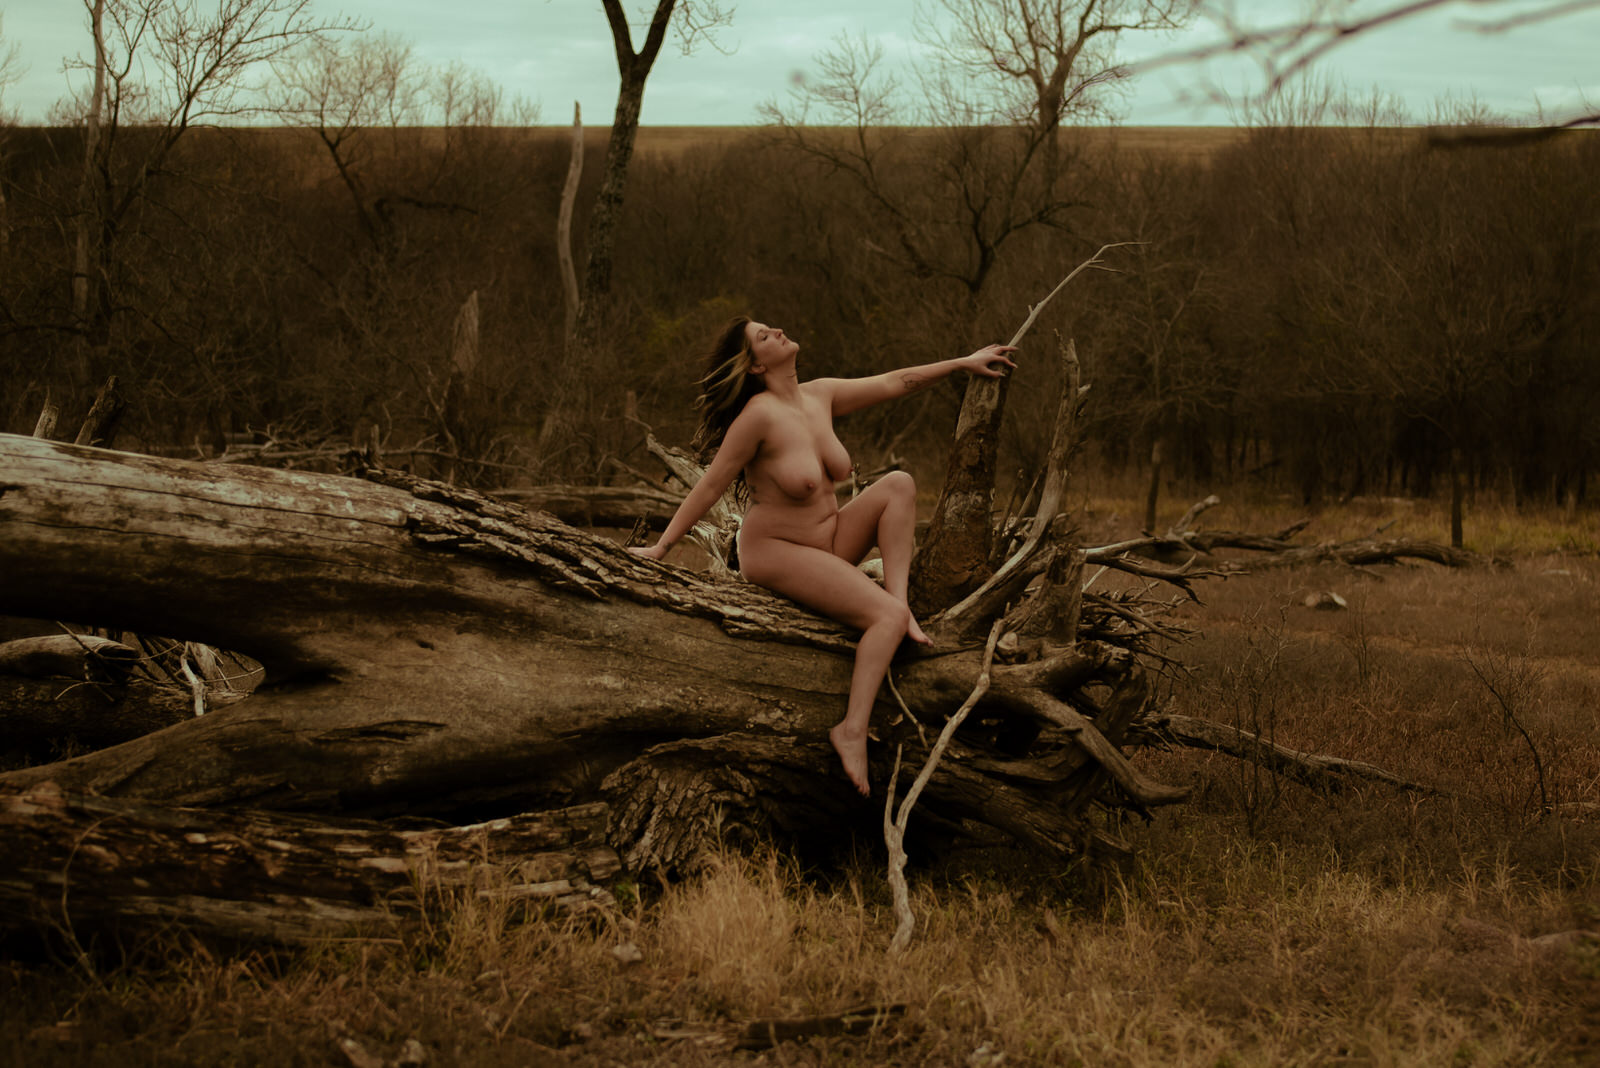 beautiful nude photography in nature